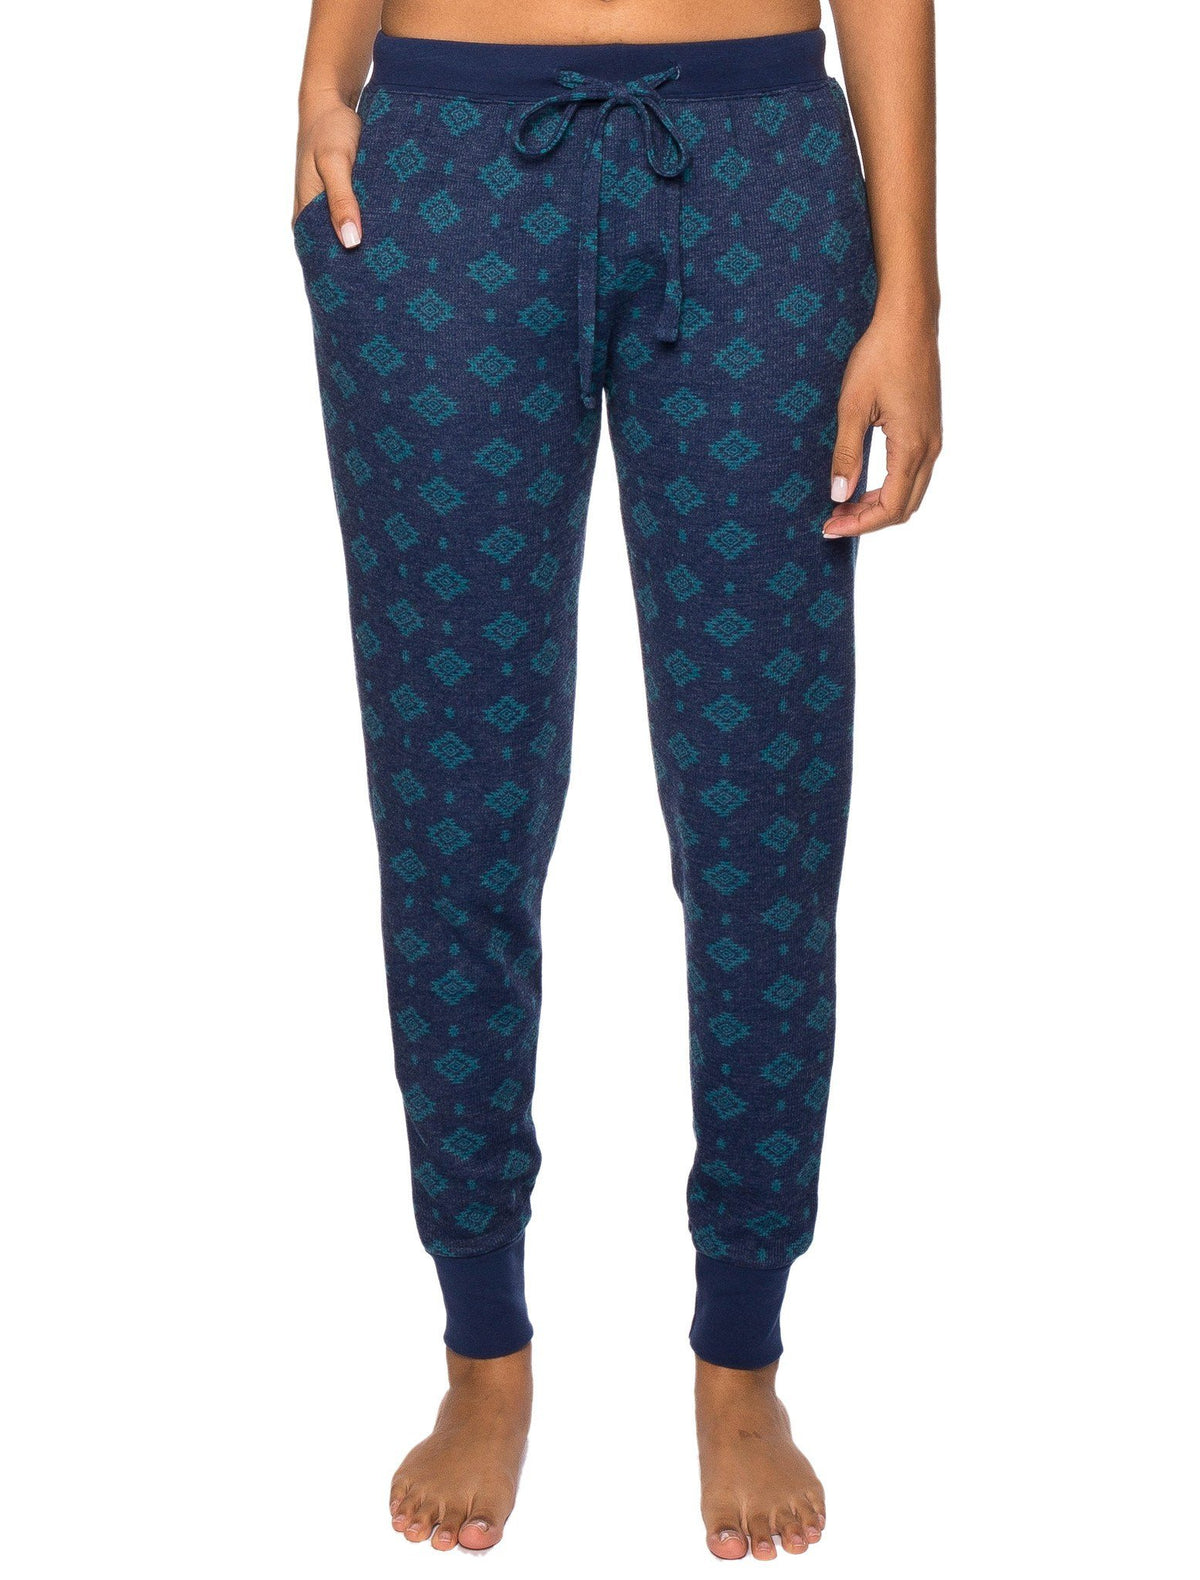 Women's Waffle Knit Thermal Jogger Lounge Pants - Aztec Navy/Teal